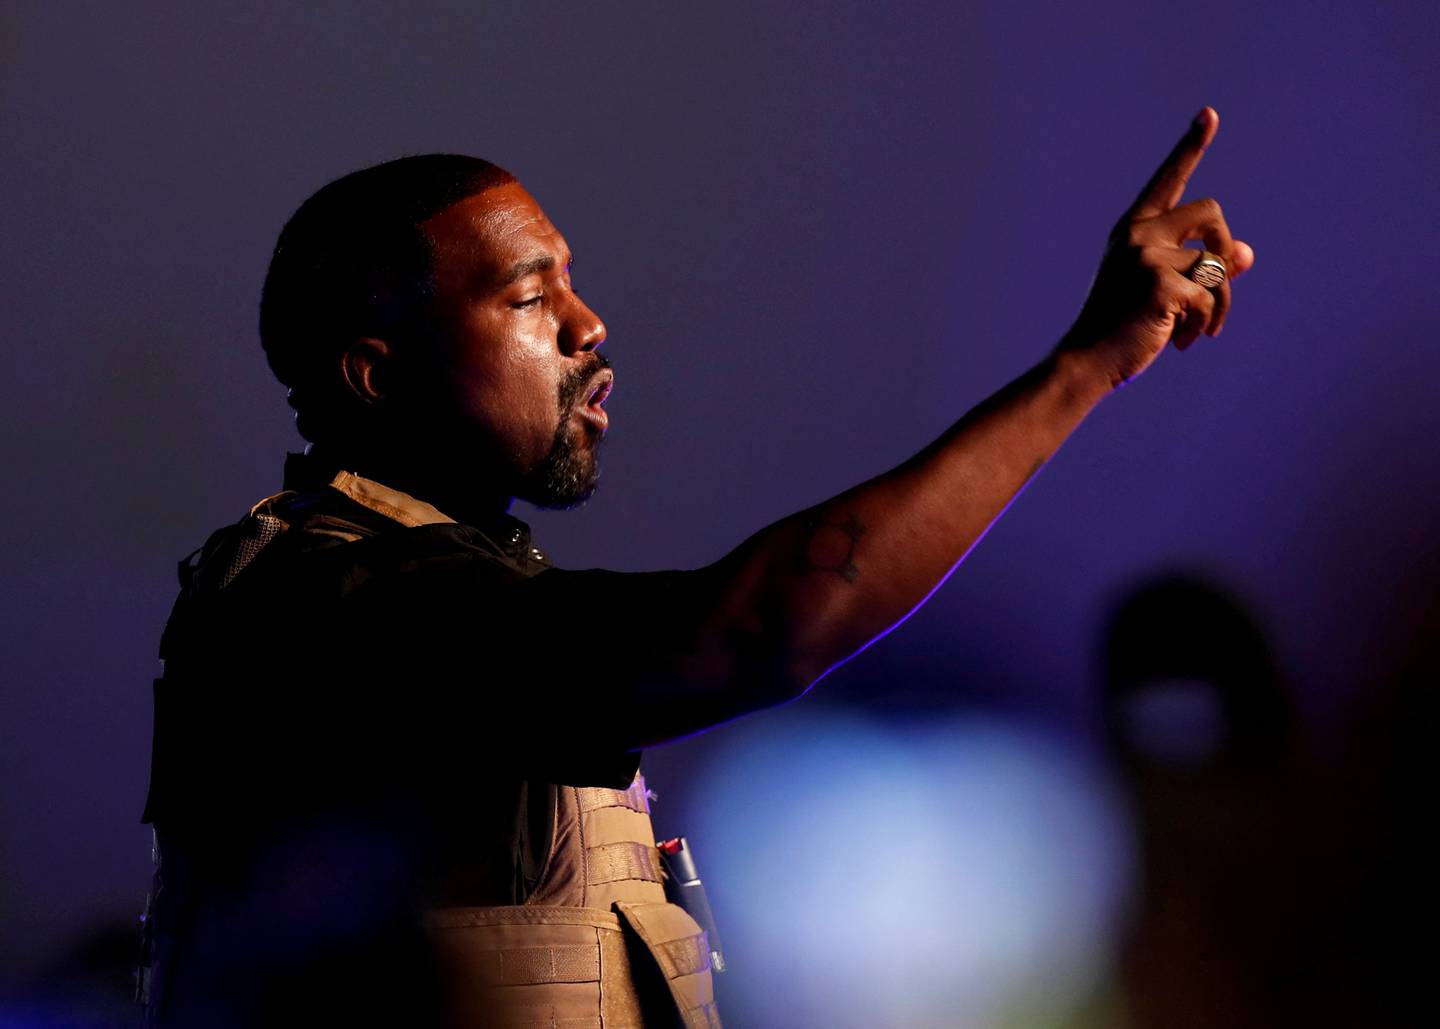 Kanye West's music and fashion career are in turmoil due to his controversial behaviour. Reuters